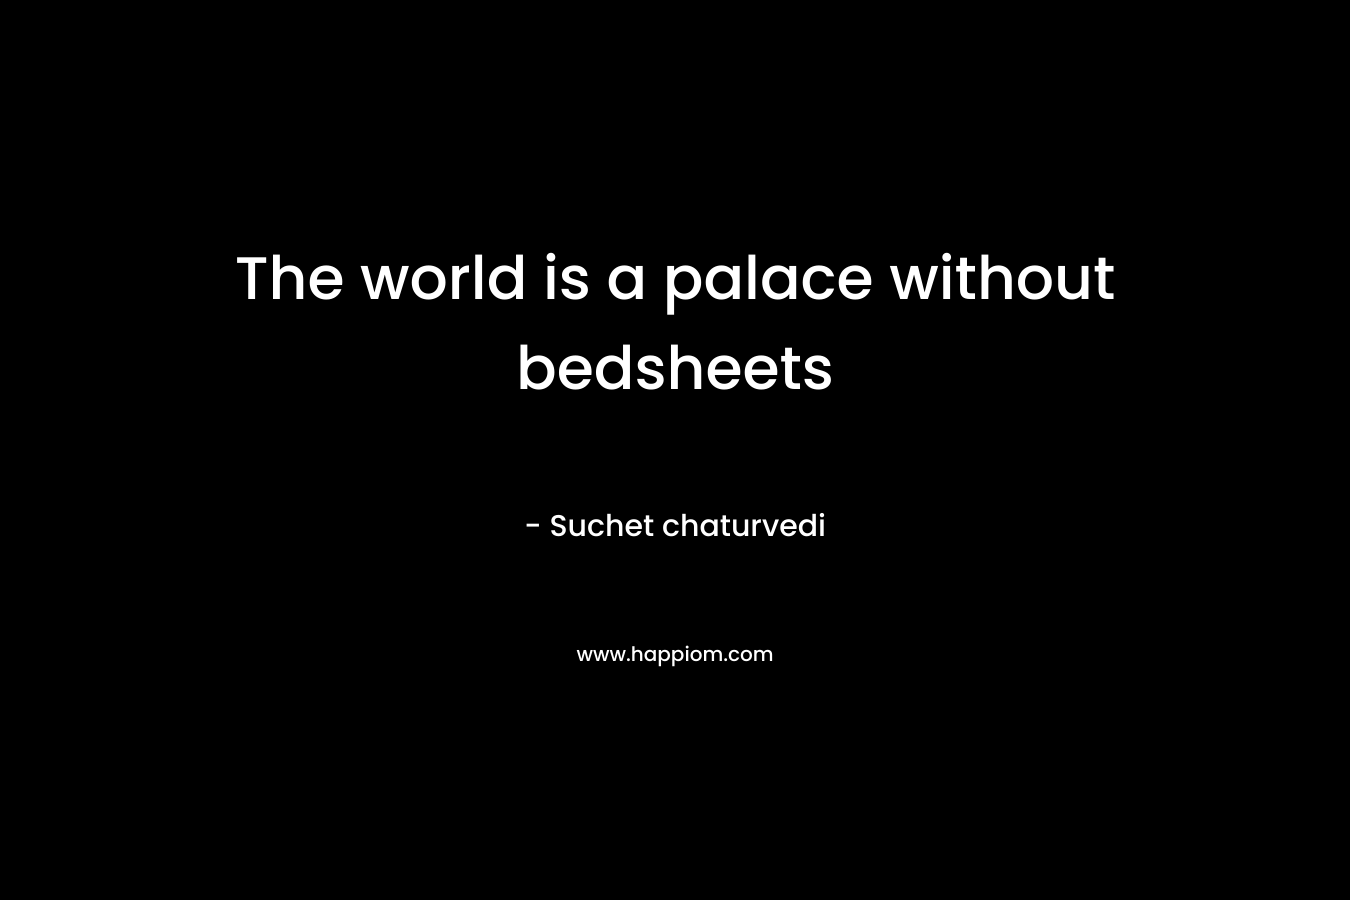 The world is a palace without bedsheets – Suchet chaturvedi